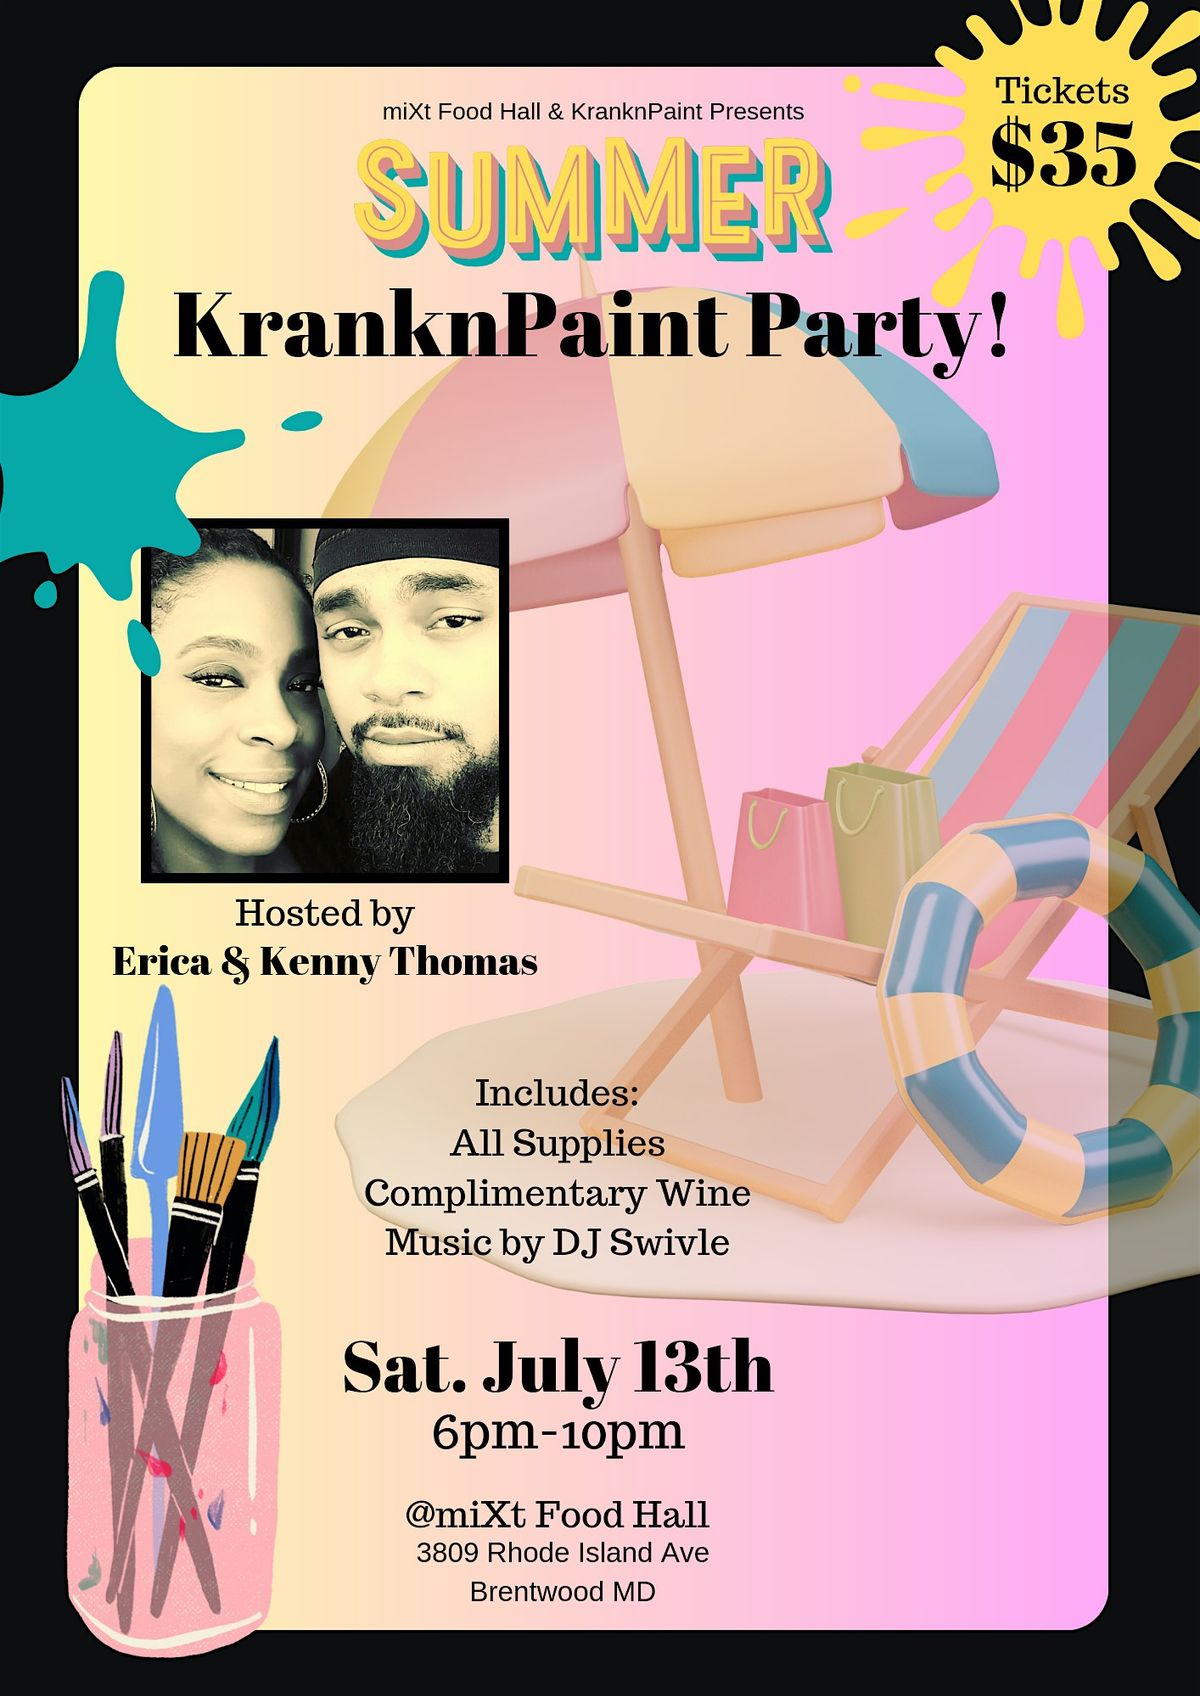 Summer KranknPaint Party